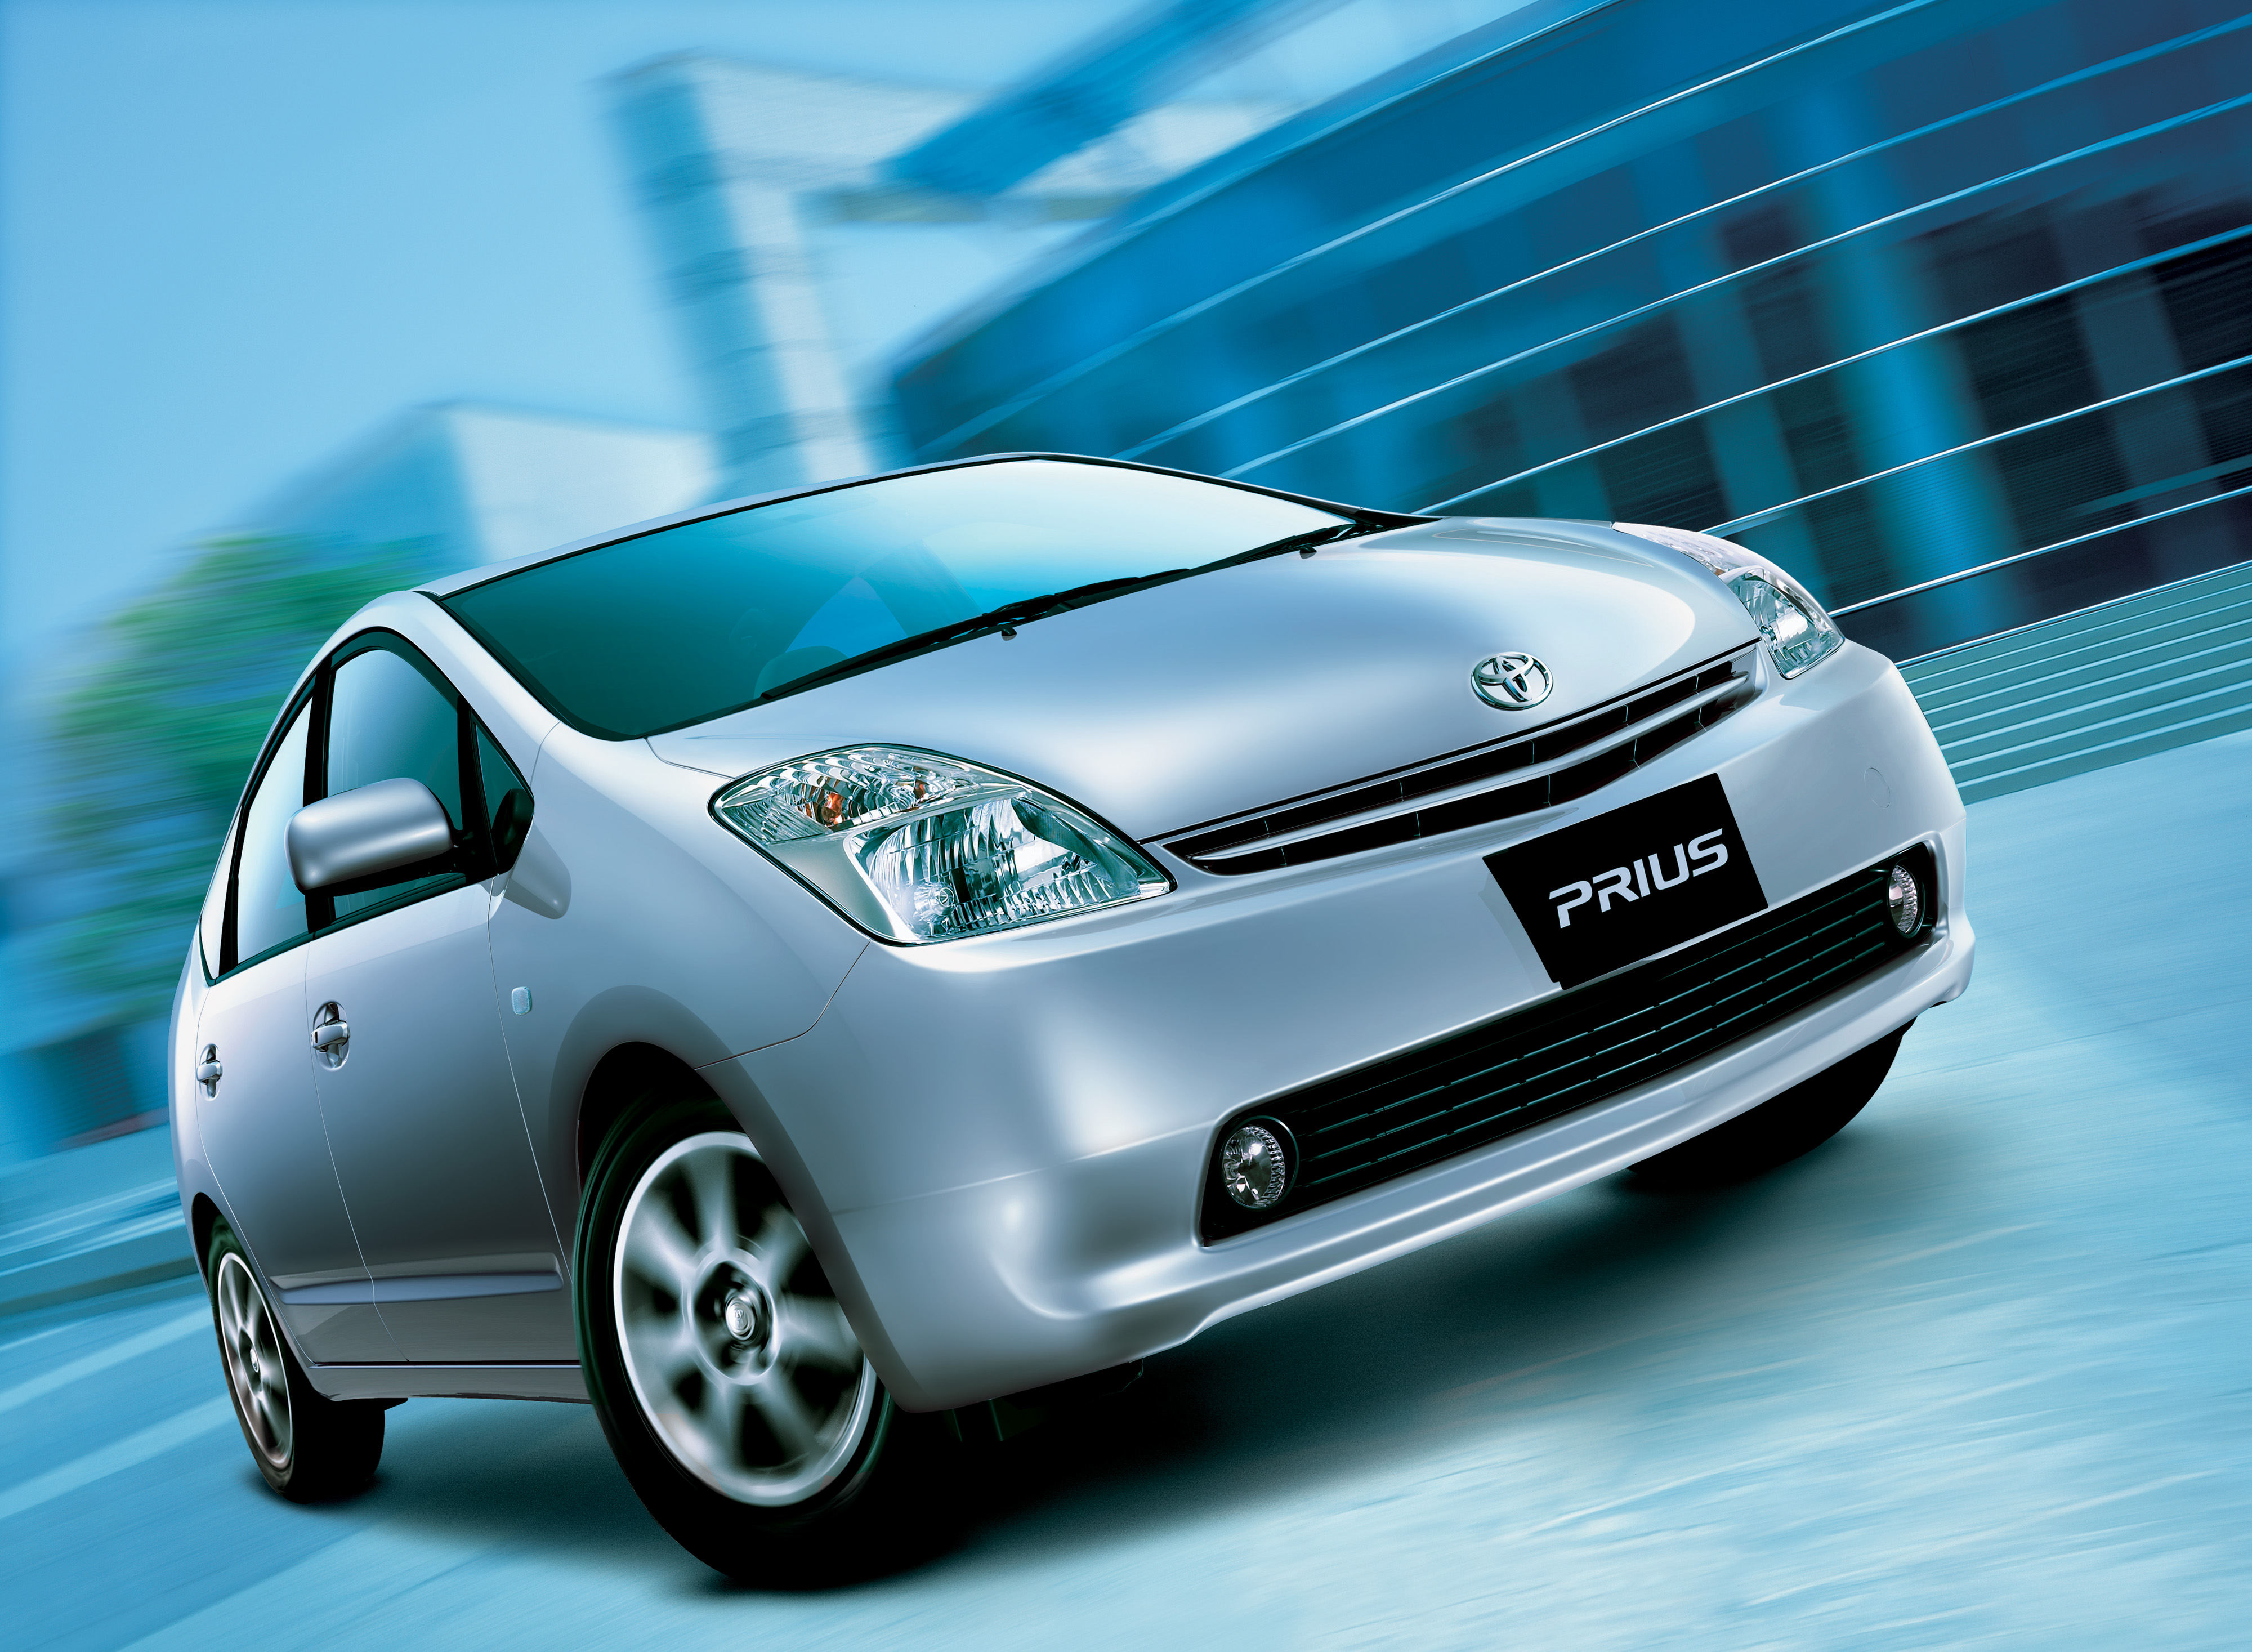 General 4000x2934 Toyota Toyota Prius hybrid (car) frontal view blurred blurry background vehicle car building silver cars